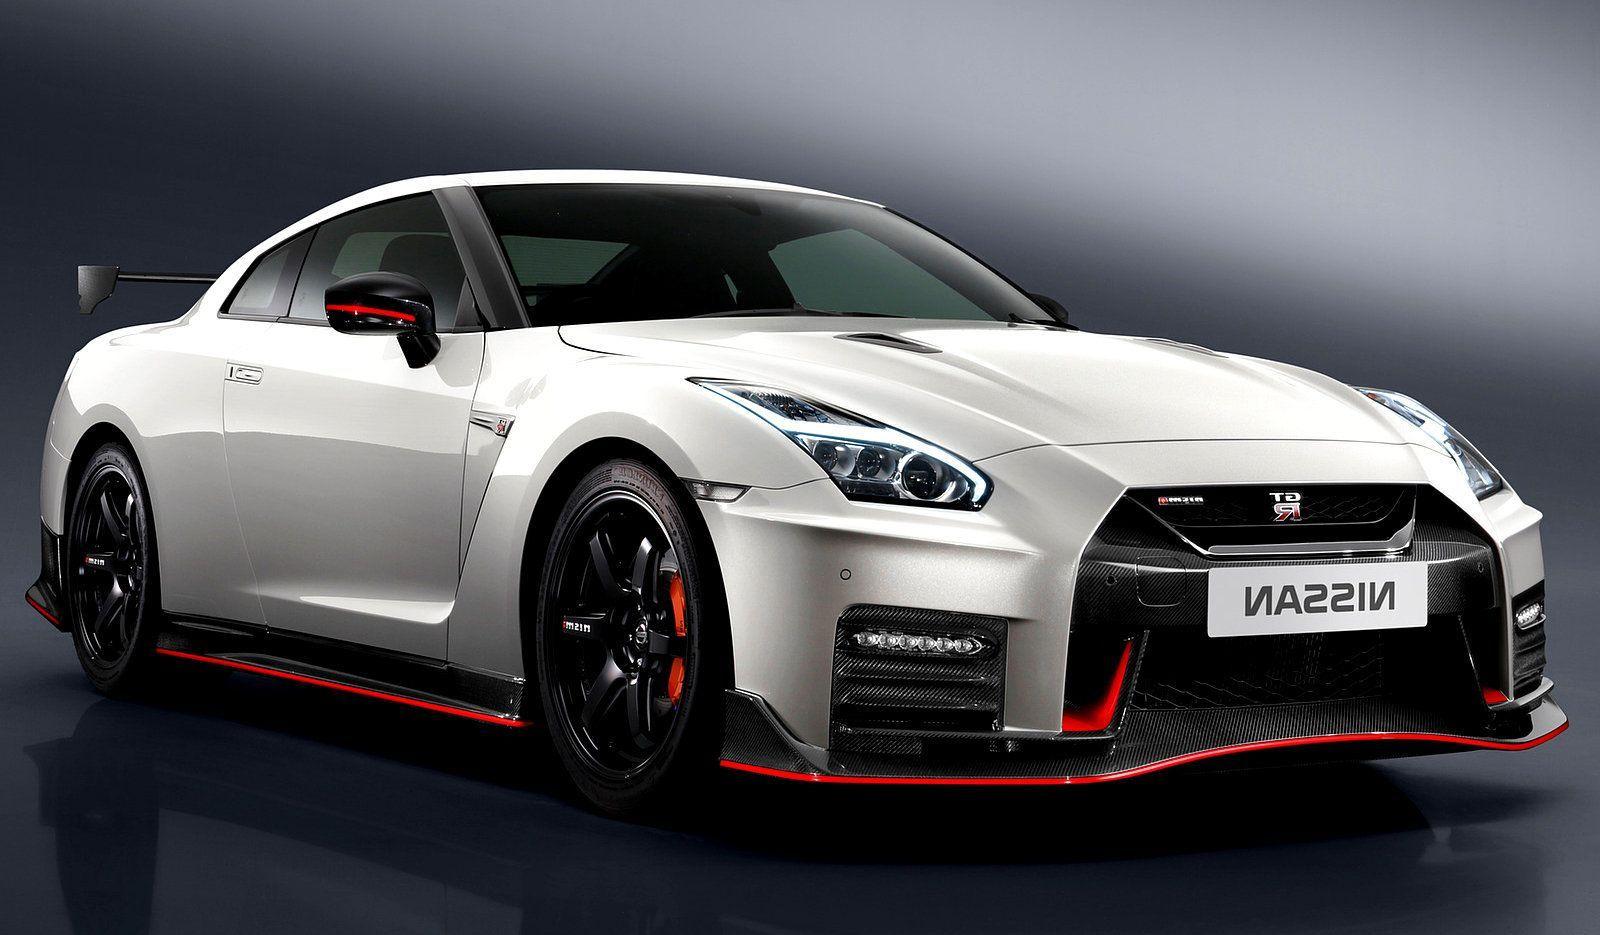 Nissan Gt R Nismo Wallpapers Wallpaper Cave